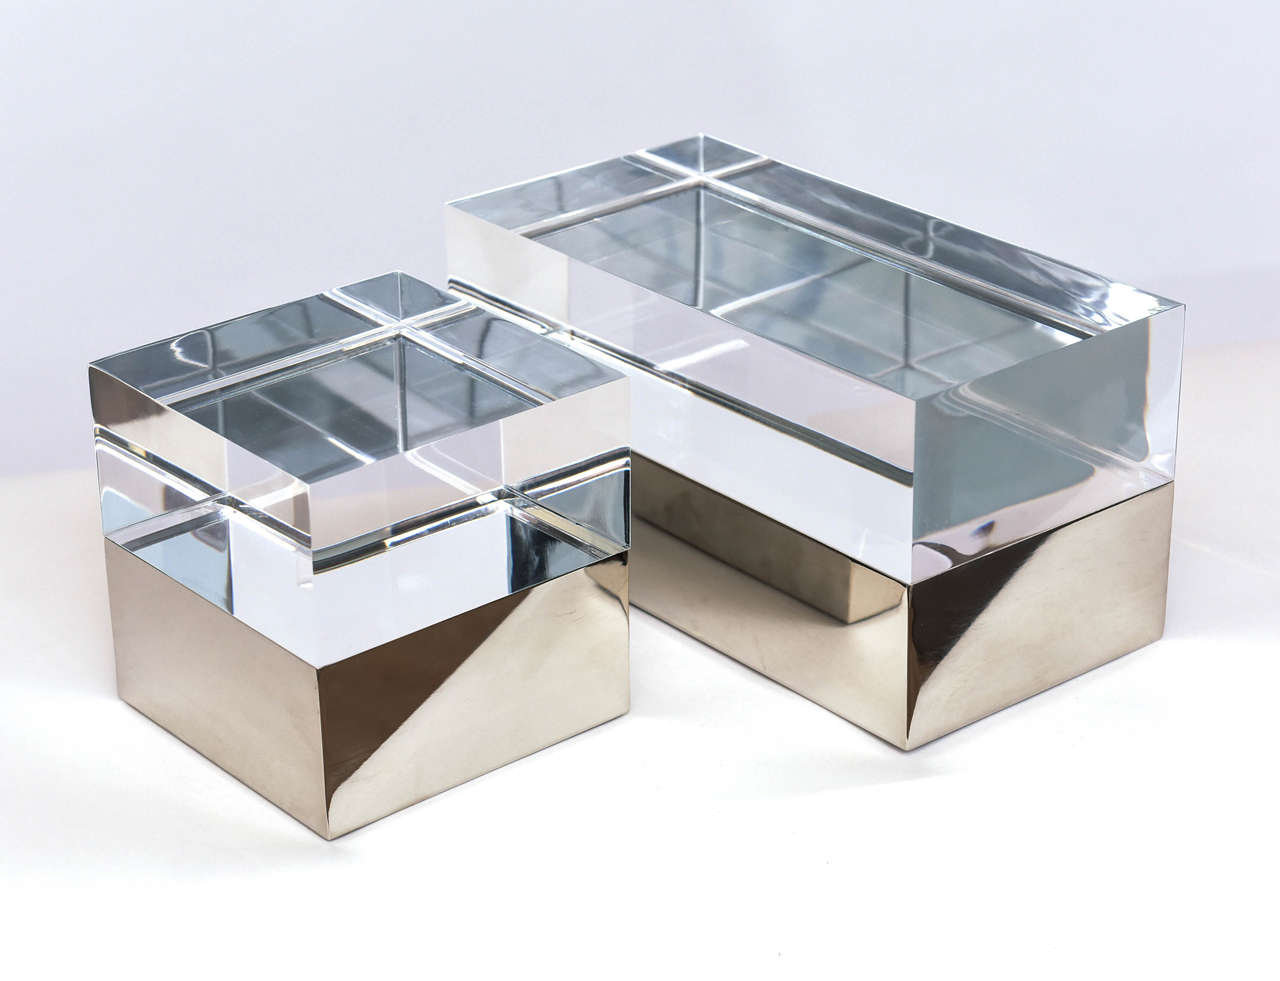 Beautiful acrylic and polished nickel boxe.
Designed by Michael Dawkins.
100% made in Italy.
Custom sizes available.
Price is for the square version.
Rectangular version sold separately.